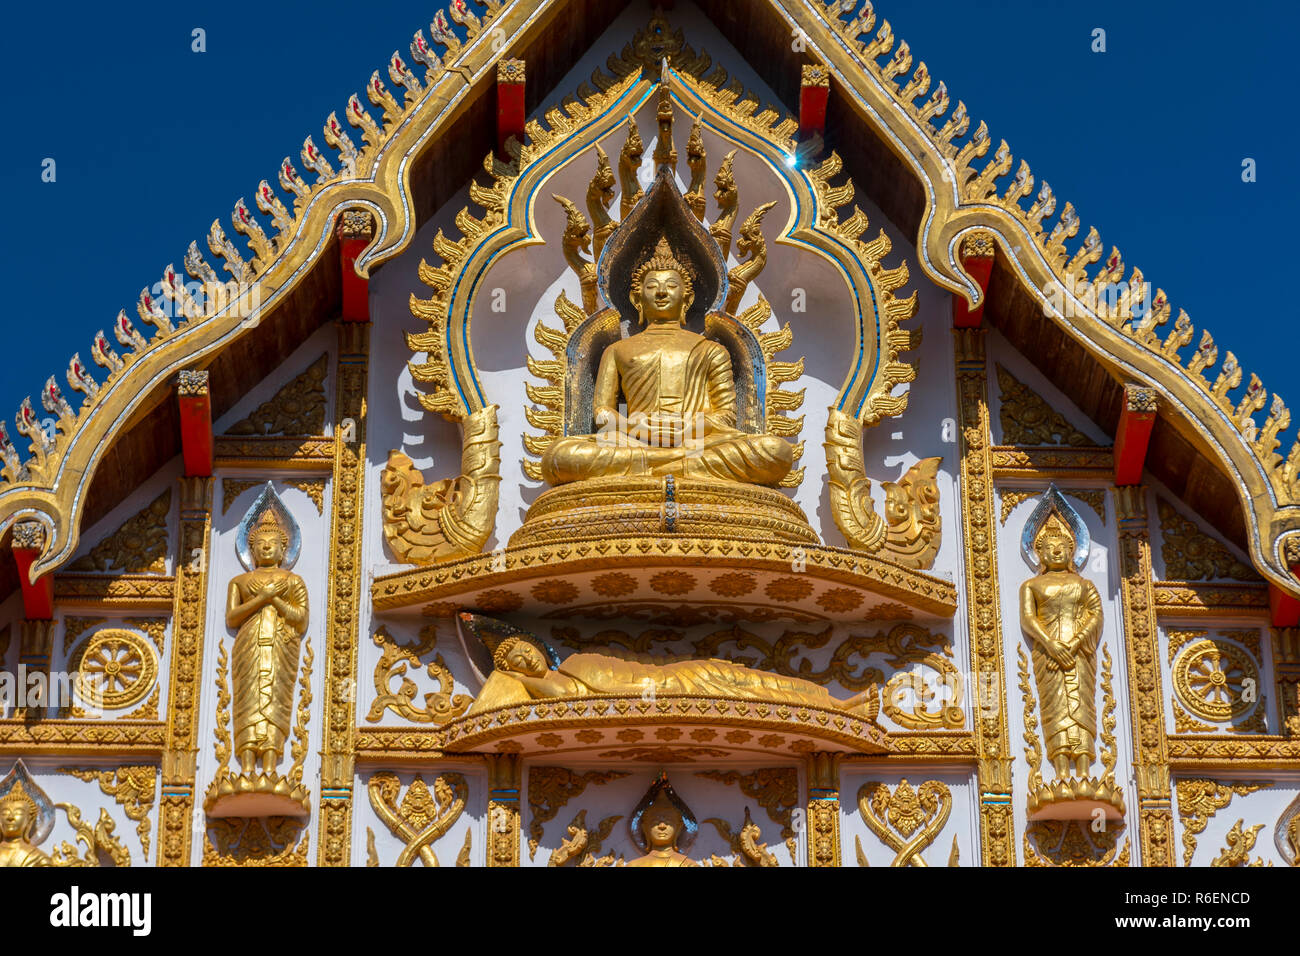 Wat That Phoun Temple In The Capital City Of Laos, Vientiane Stock Photo